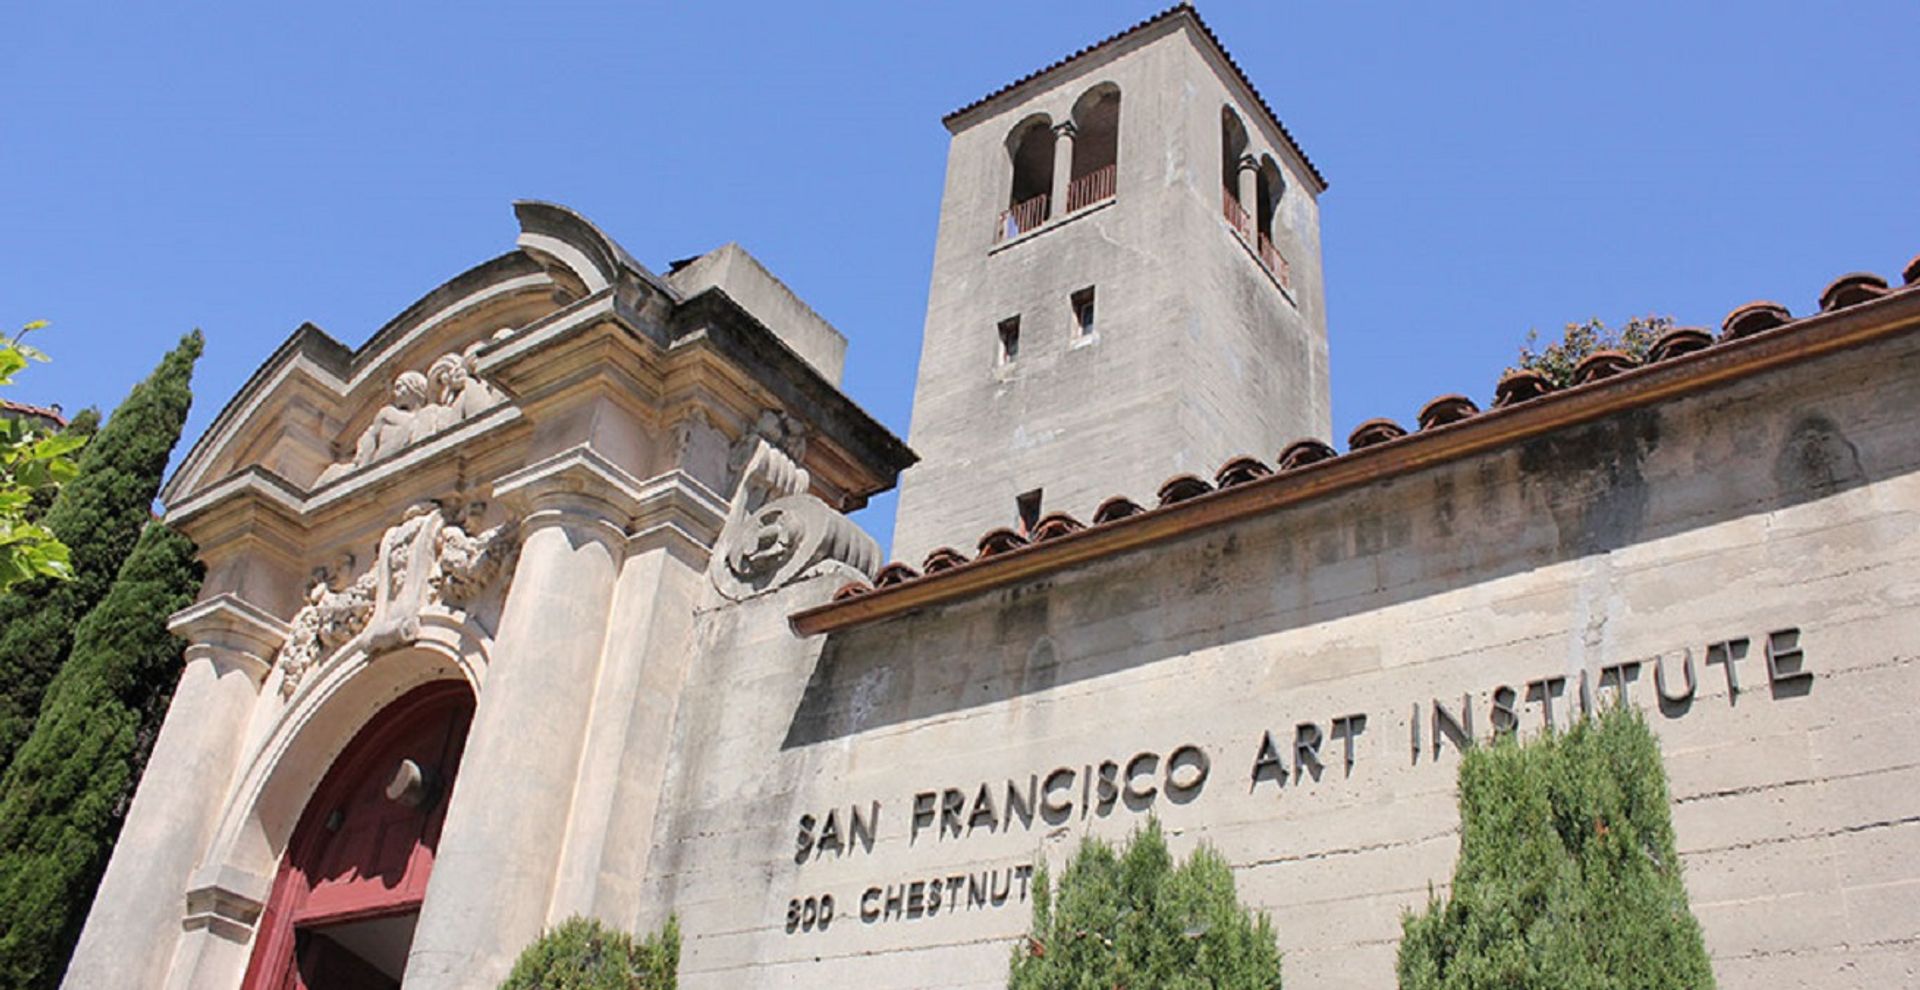 Citing the coronavirus pandemic, the San Francisco Art Institute says it has not succeeded in finding a financial partner Courtesy of bart.gov